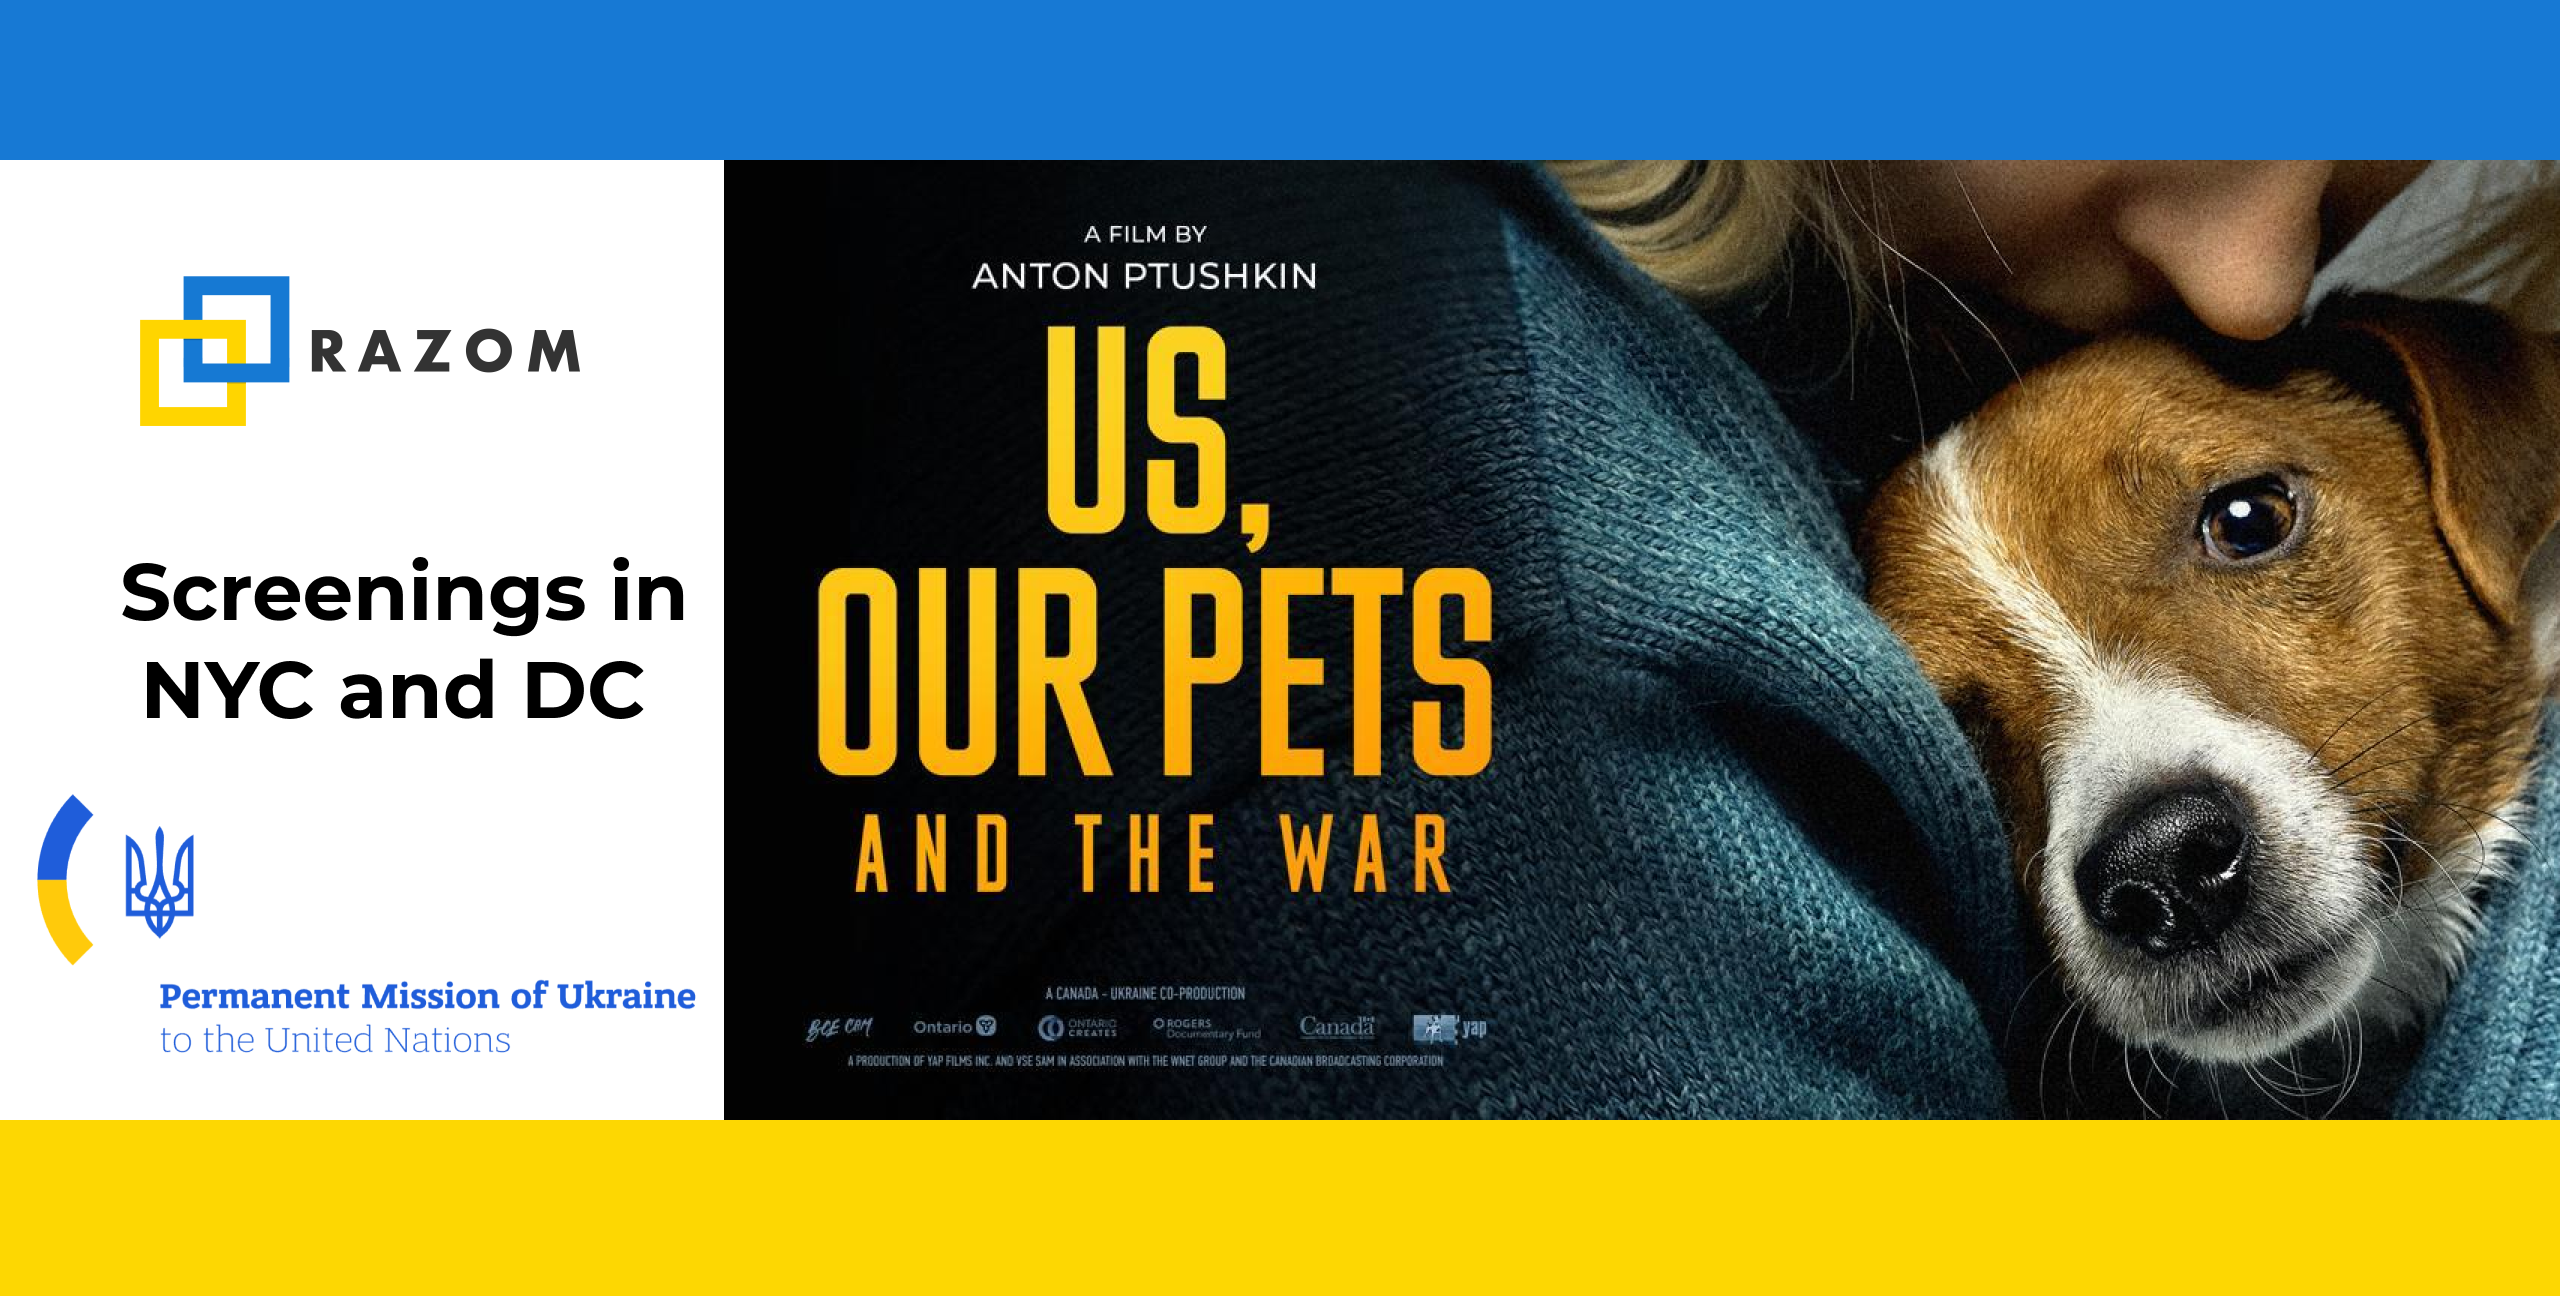 Premiere Screenings of “Us, Our Pets, and the War” by Anton Ptushkin in NYC and DC